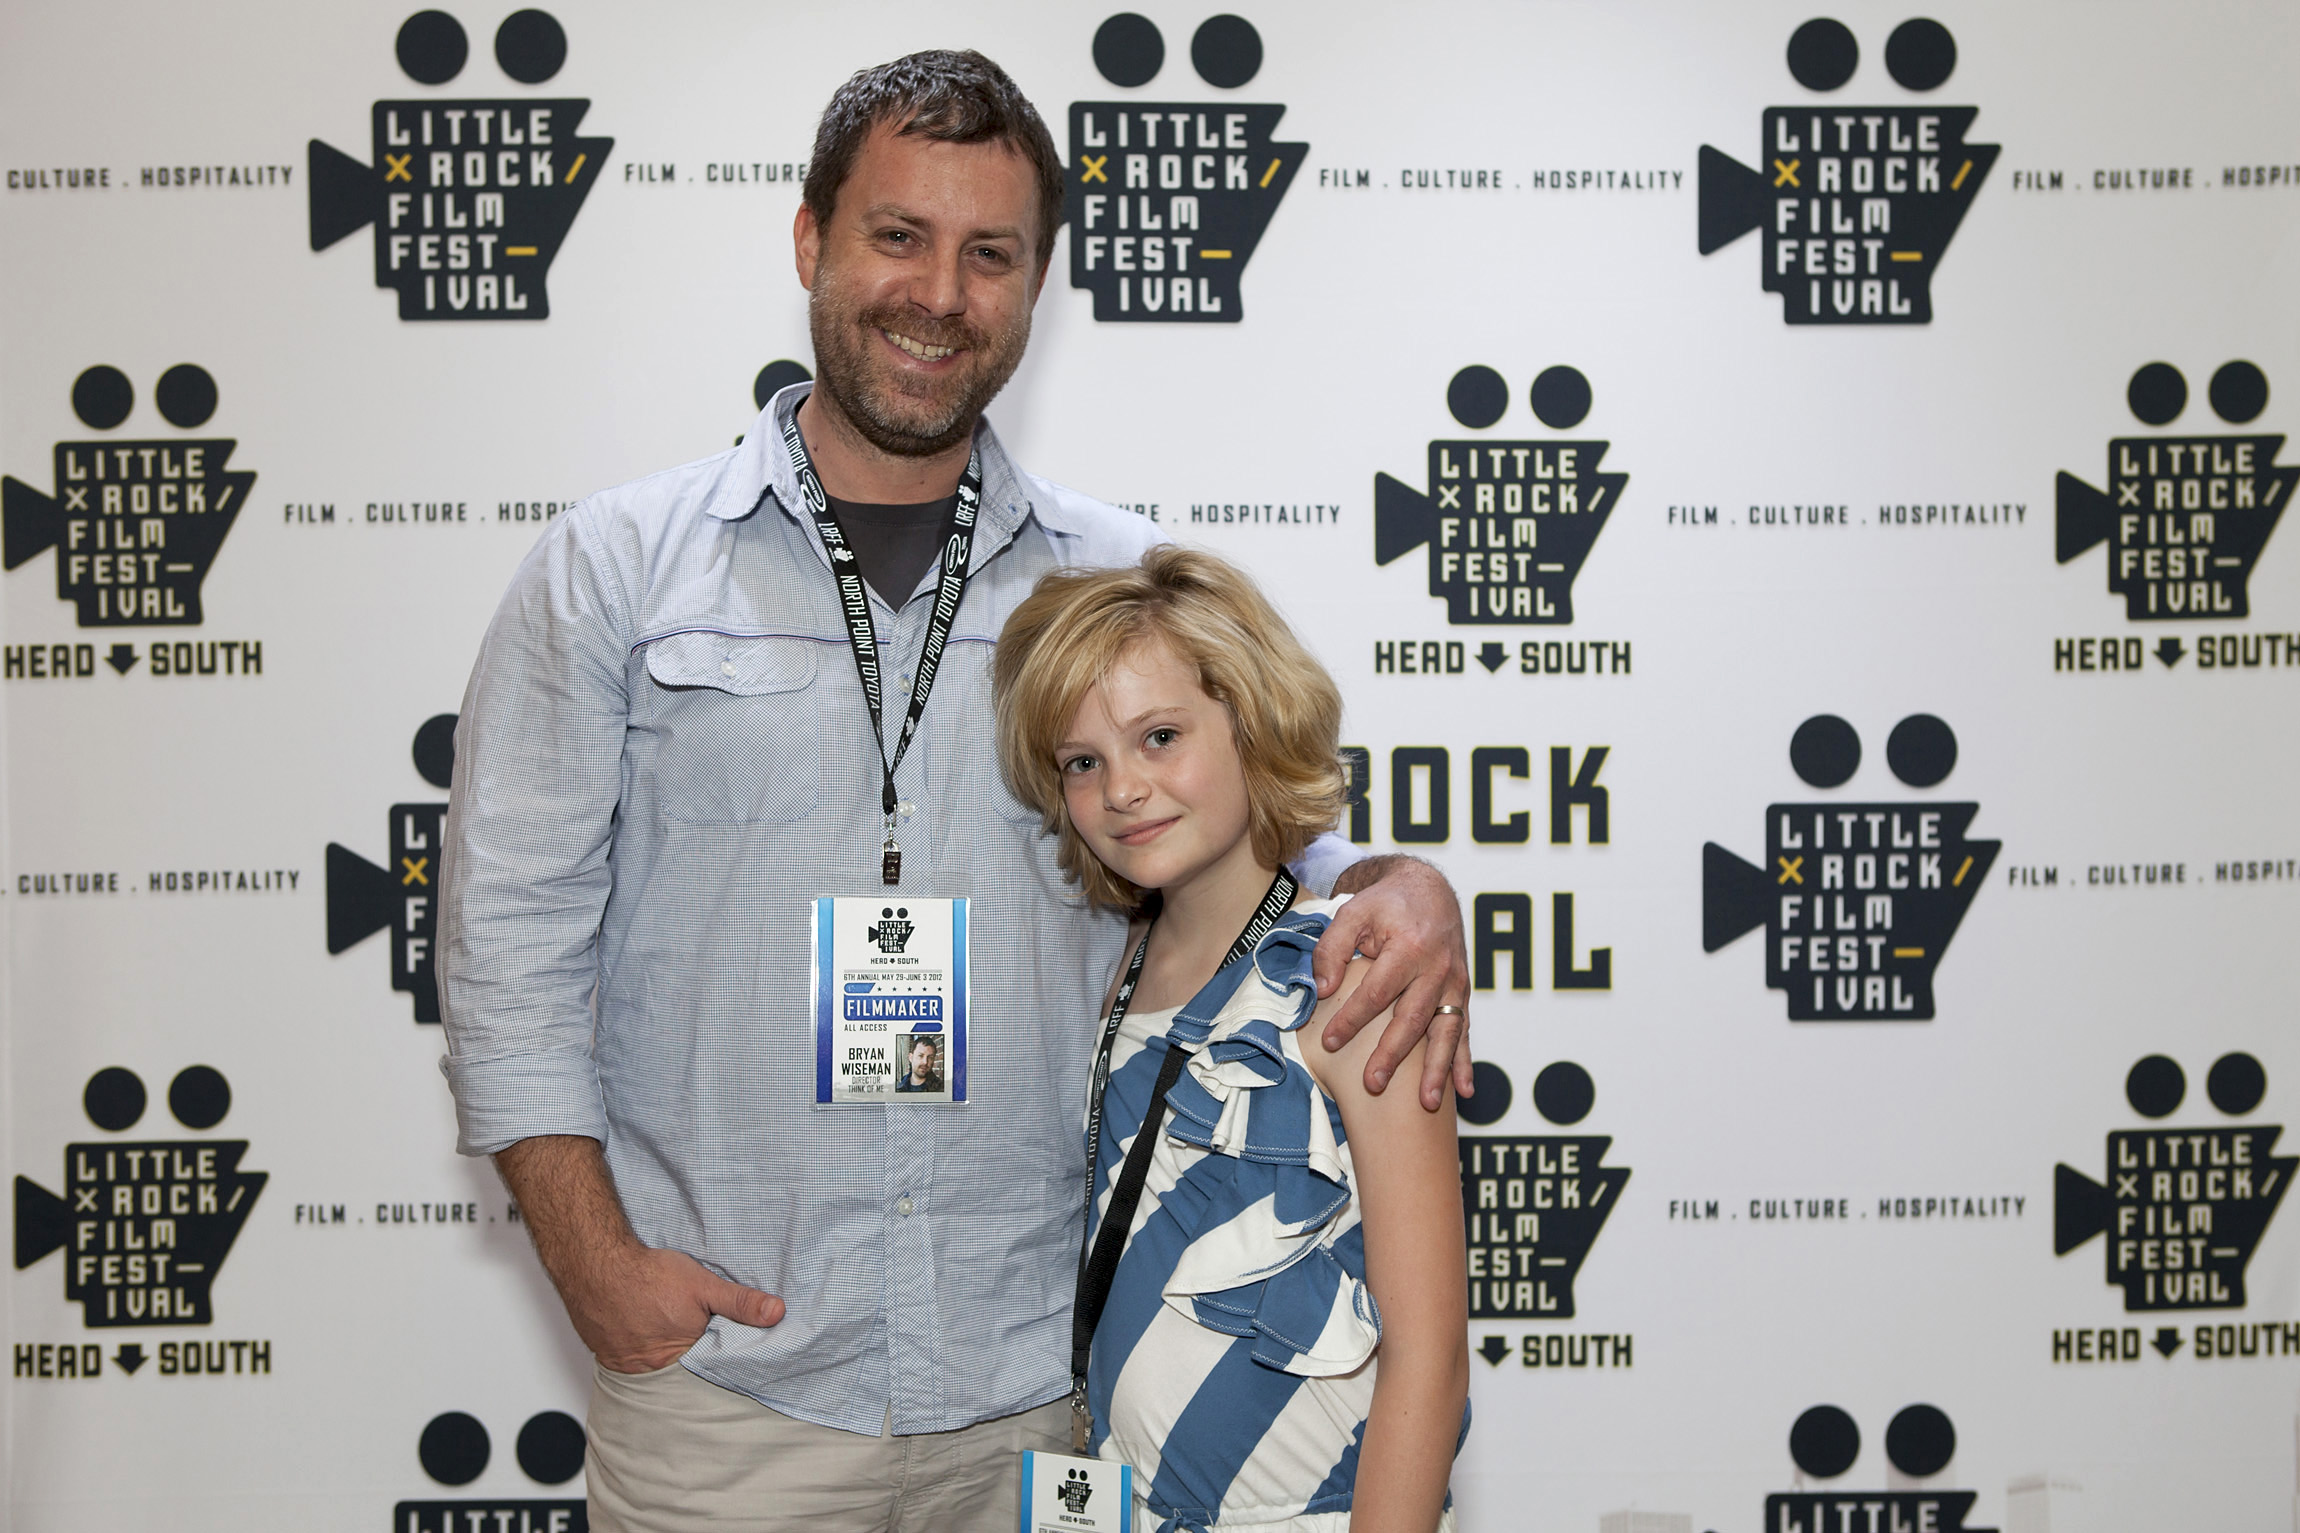 Audrey Scott with About Sunny (Think of Me) Director Bryan Wiseman at The LIttle Rock Film Festival in 2012